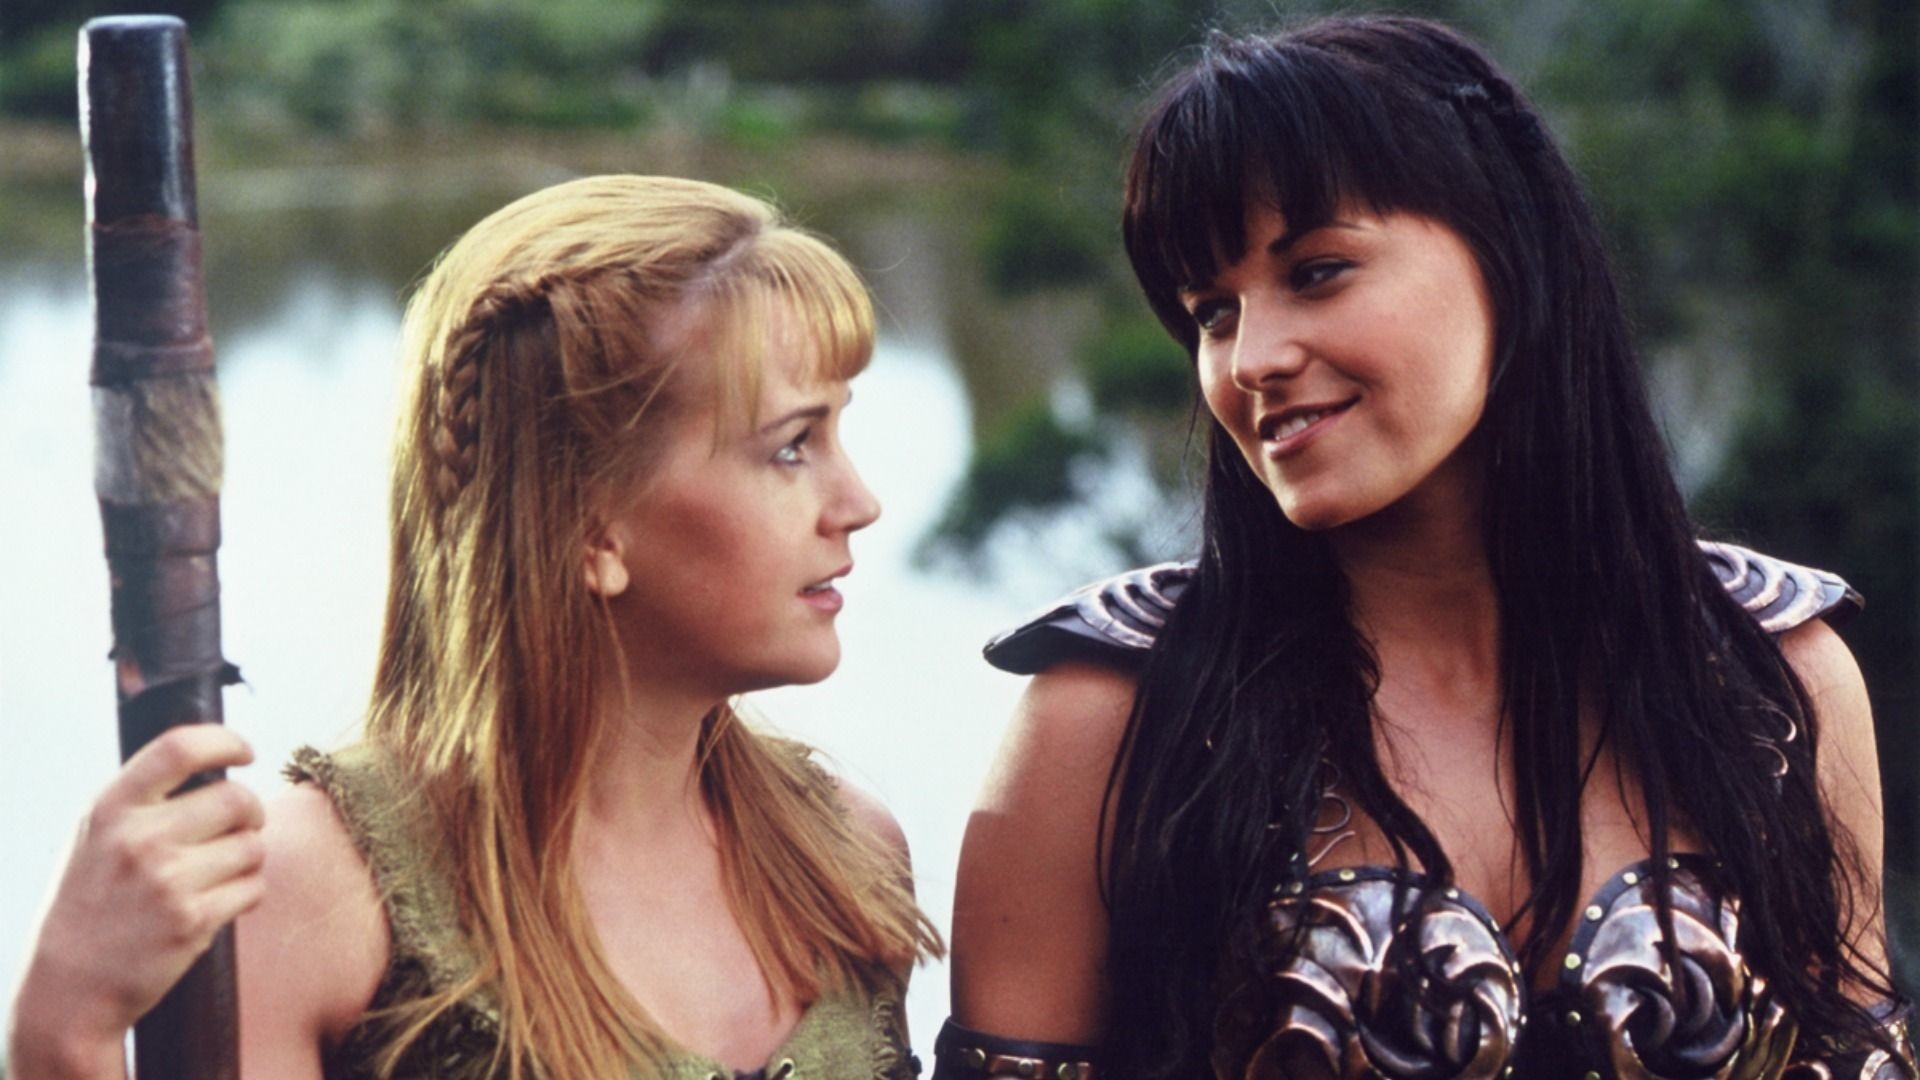 Xena: Warrior Princess (TV Series): With Gabrielle - a former subordinate and later a soulmate to the main character. 1920x1080 Full HD Background.